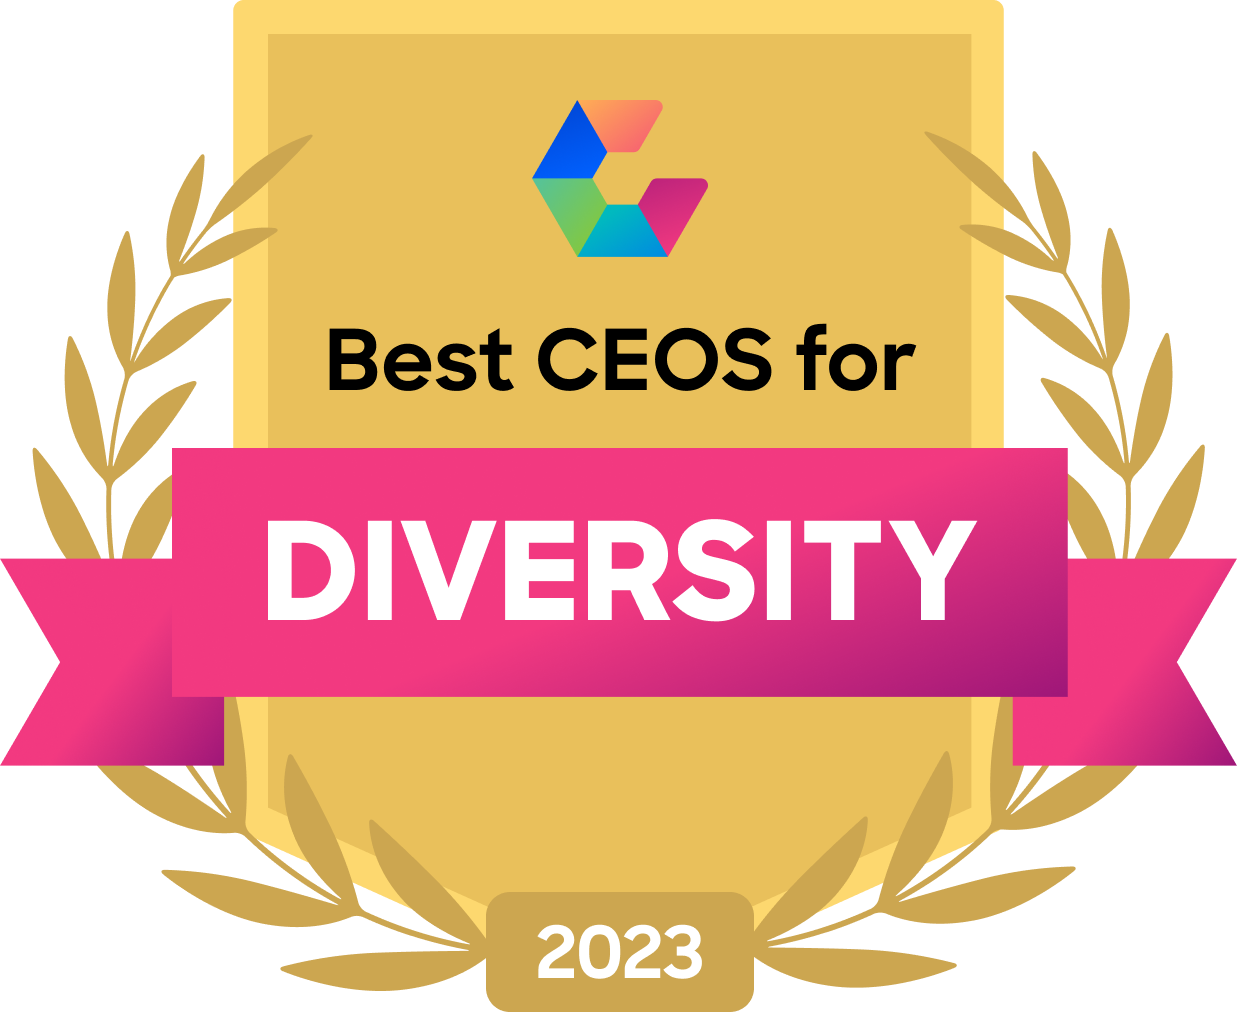 Best CEO for Diversity 2023